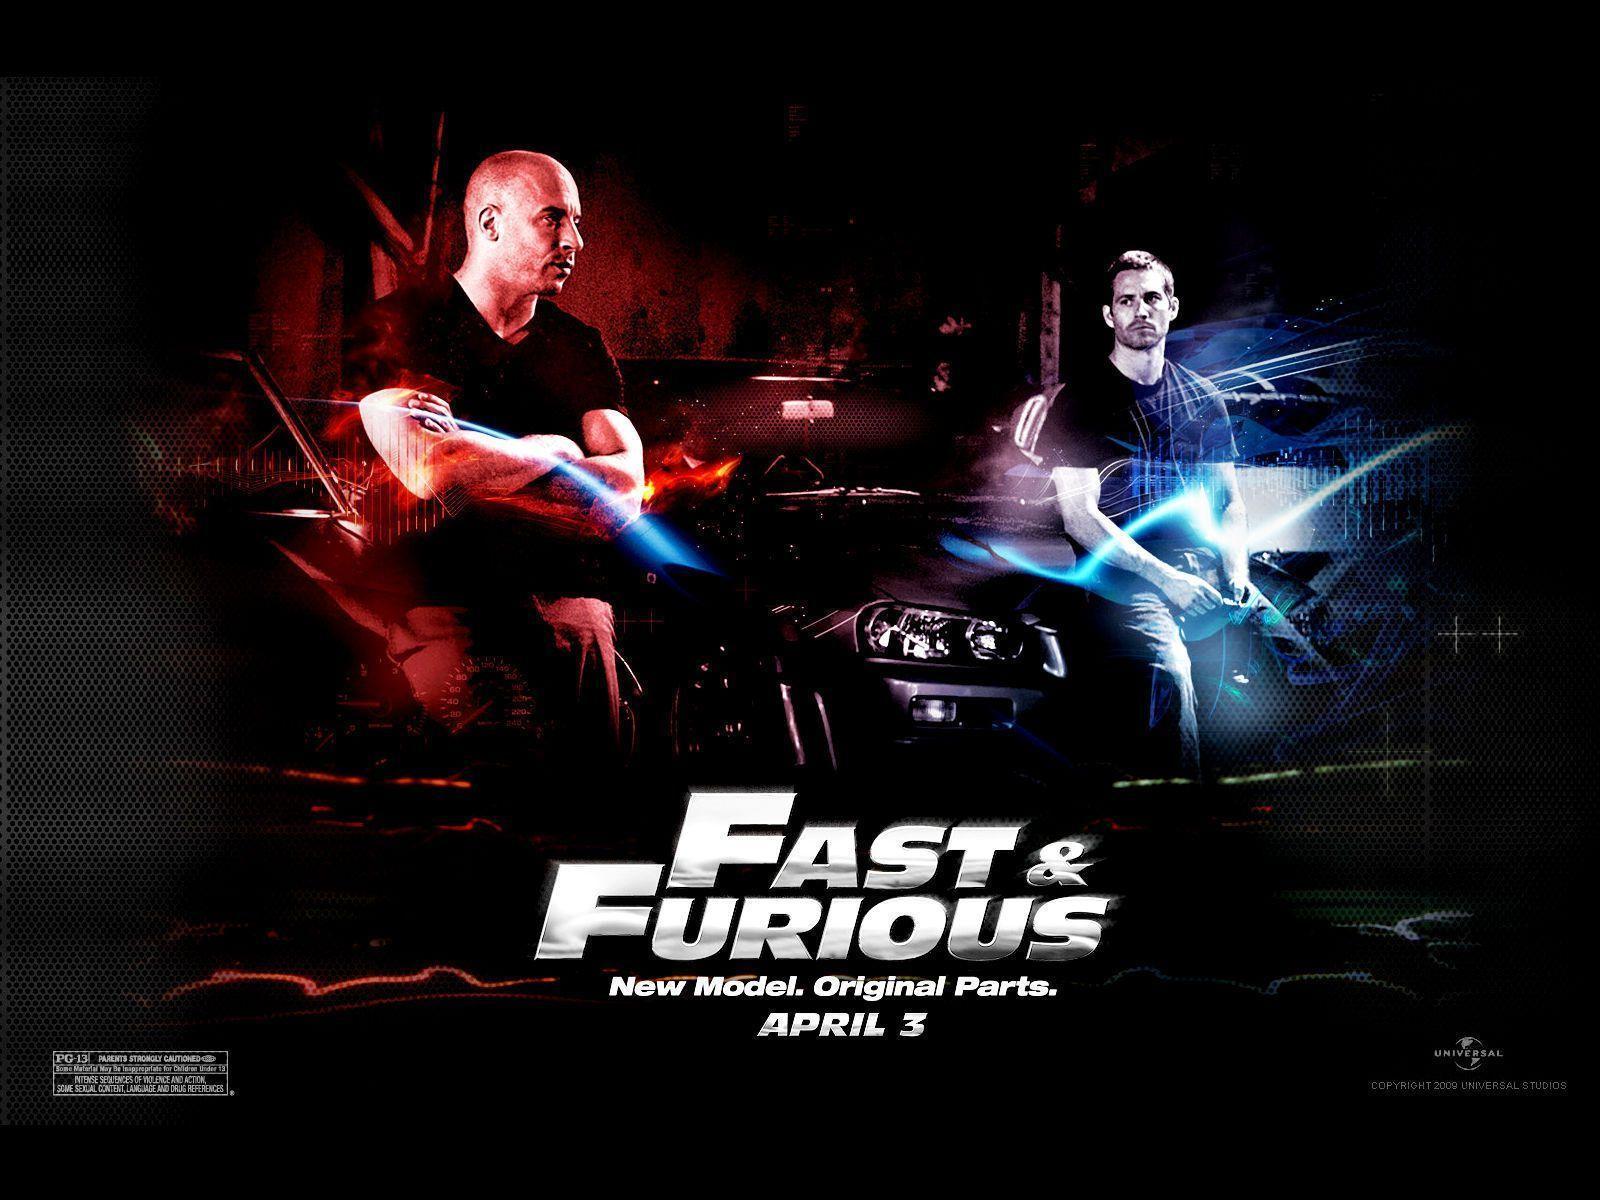 Fast & Furious and Furious Wallpaper